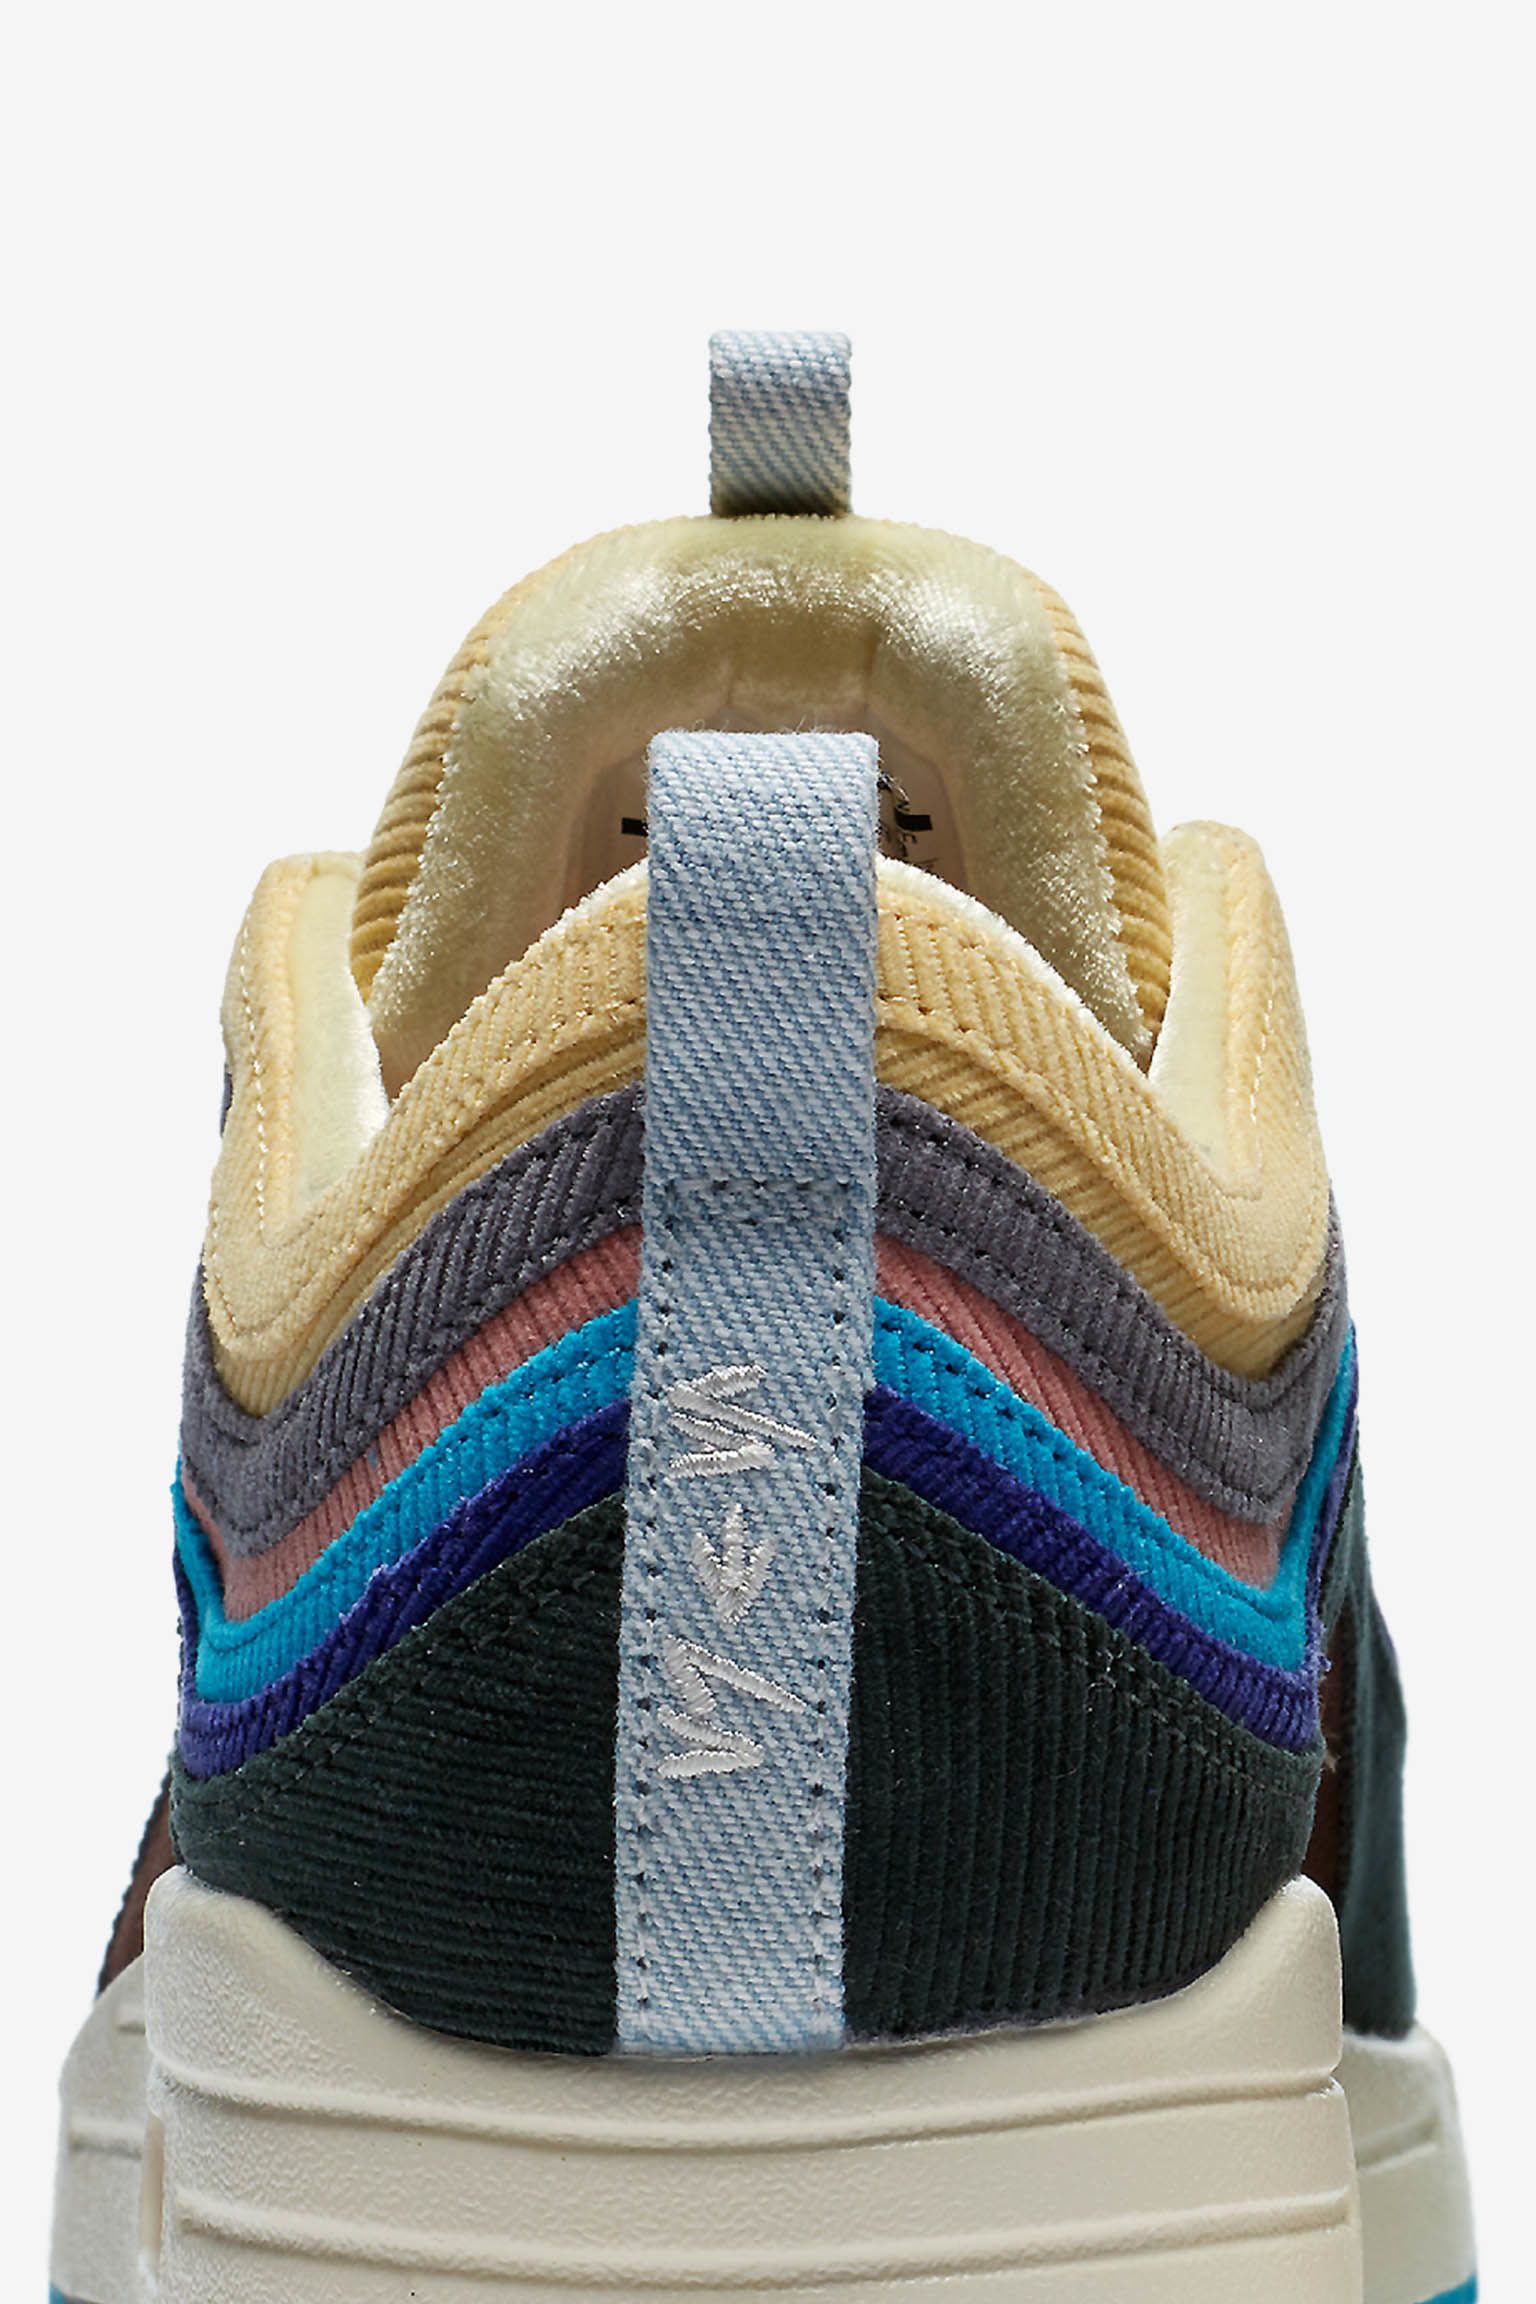 Nike Air Max 1/97 'Sean Wotherspoon' Release Date. Nike SNKRS عروض حفاضات بامبرز